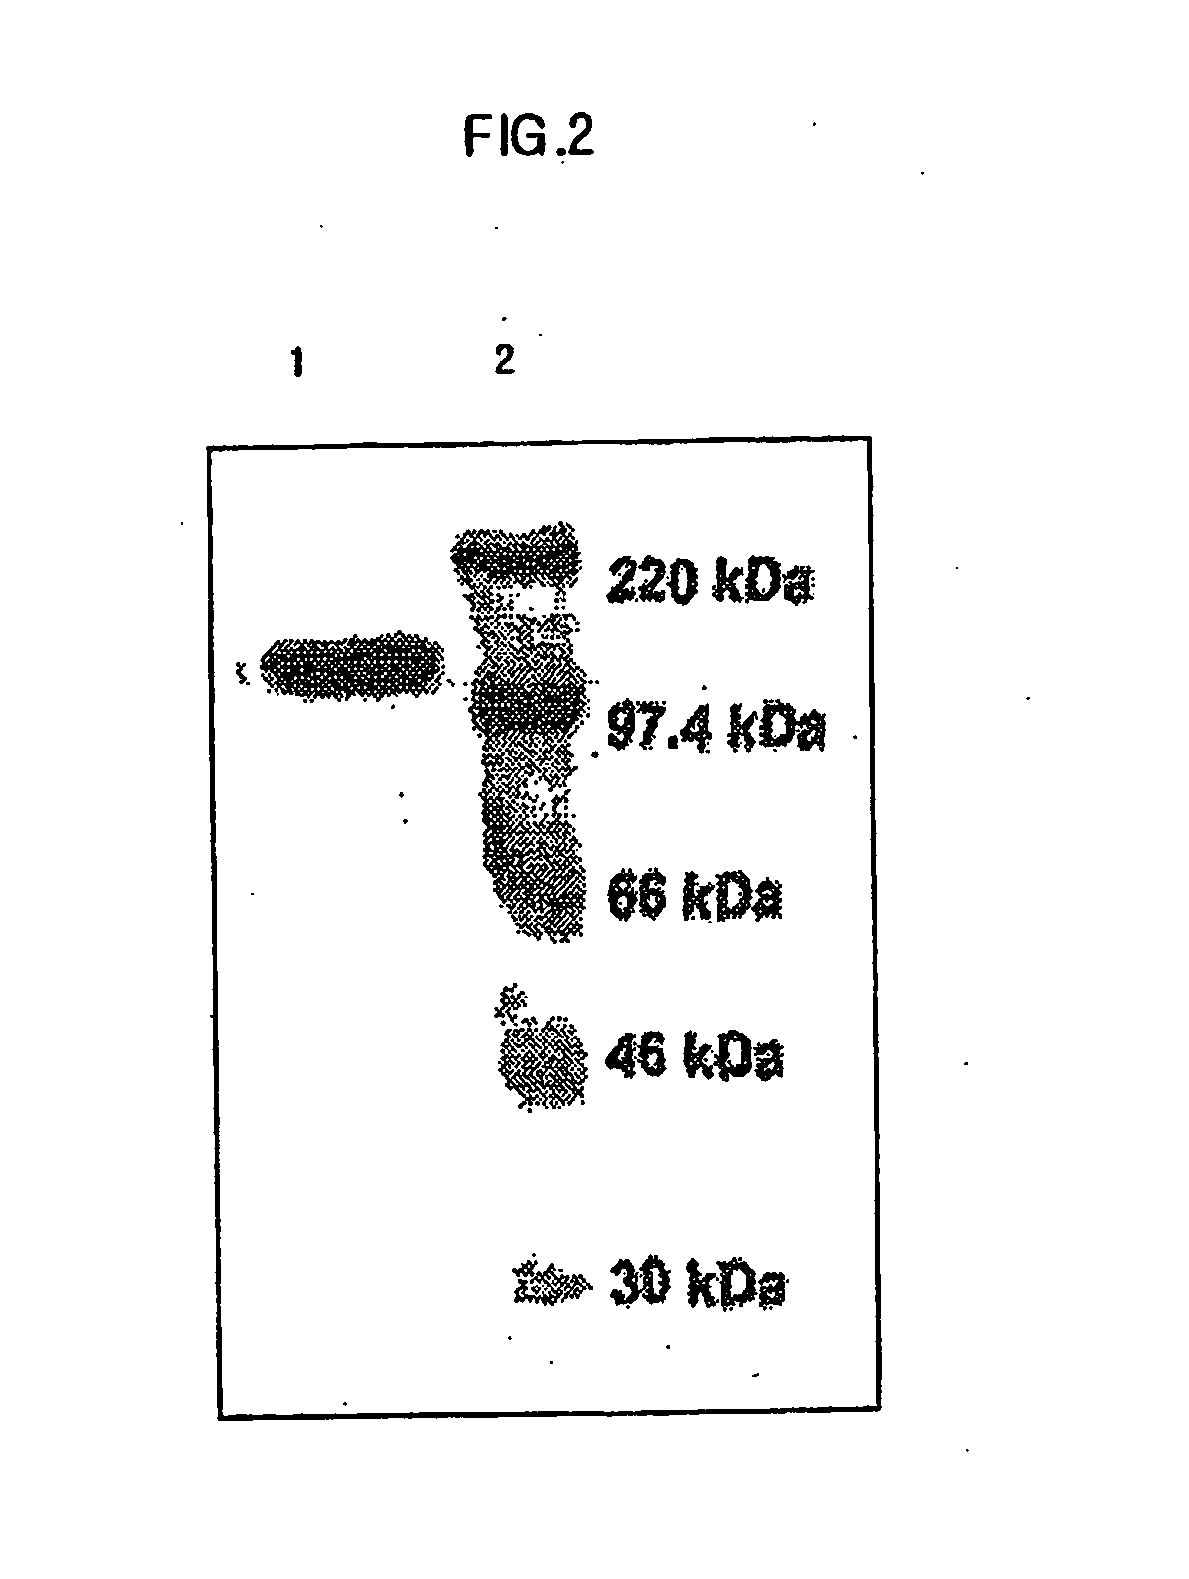 Biomolecule transduction motif Mph-1-BTM and the use thereof